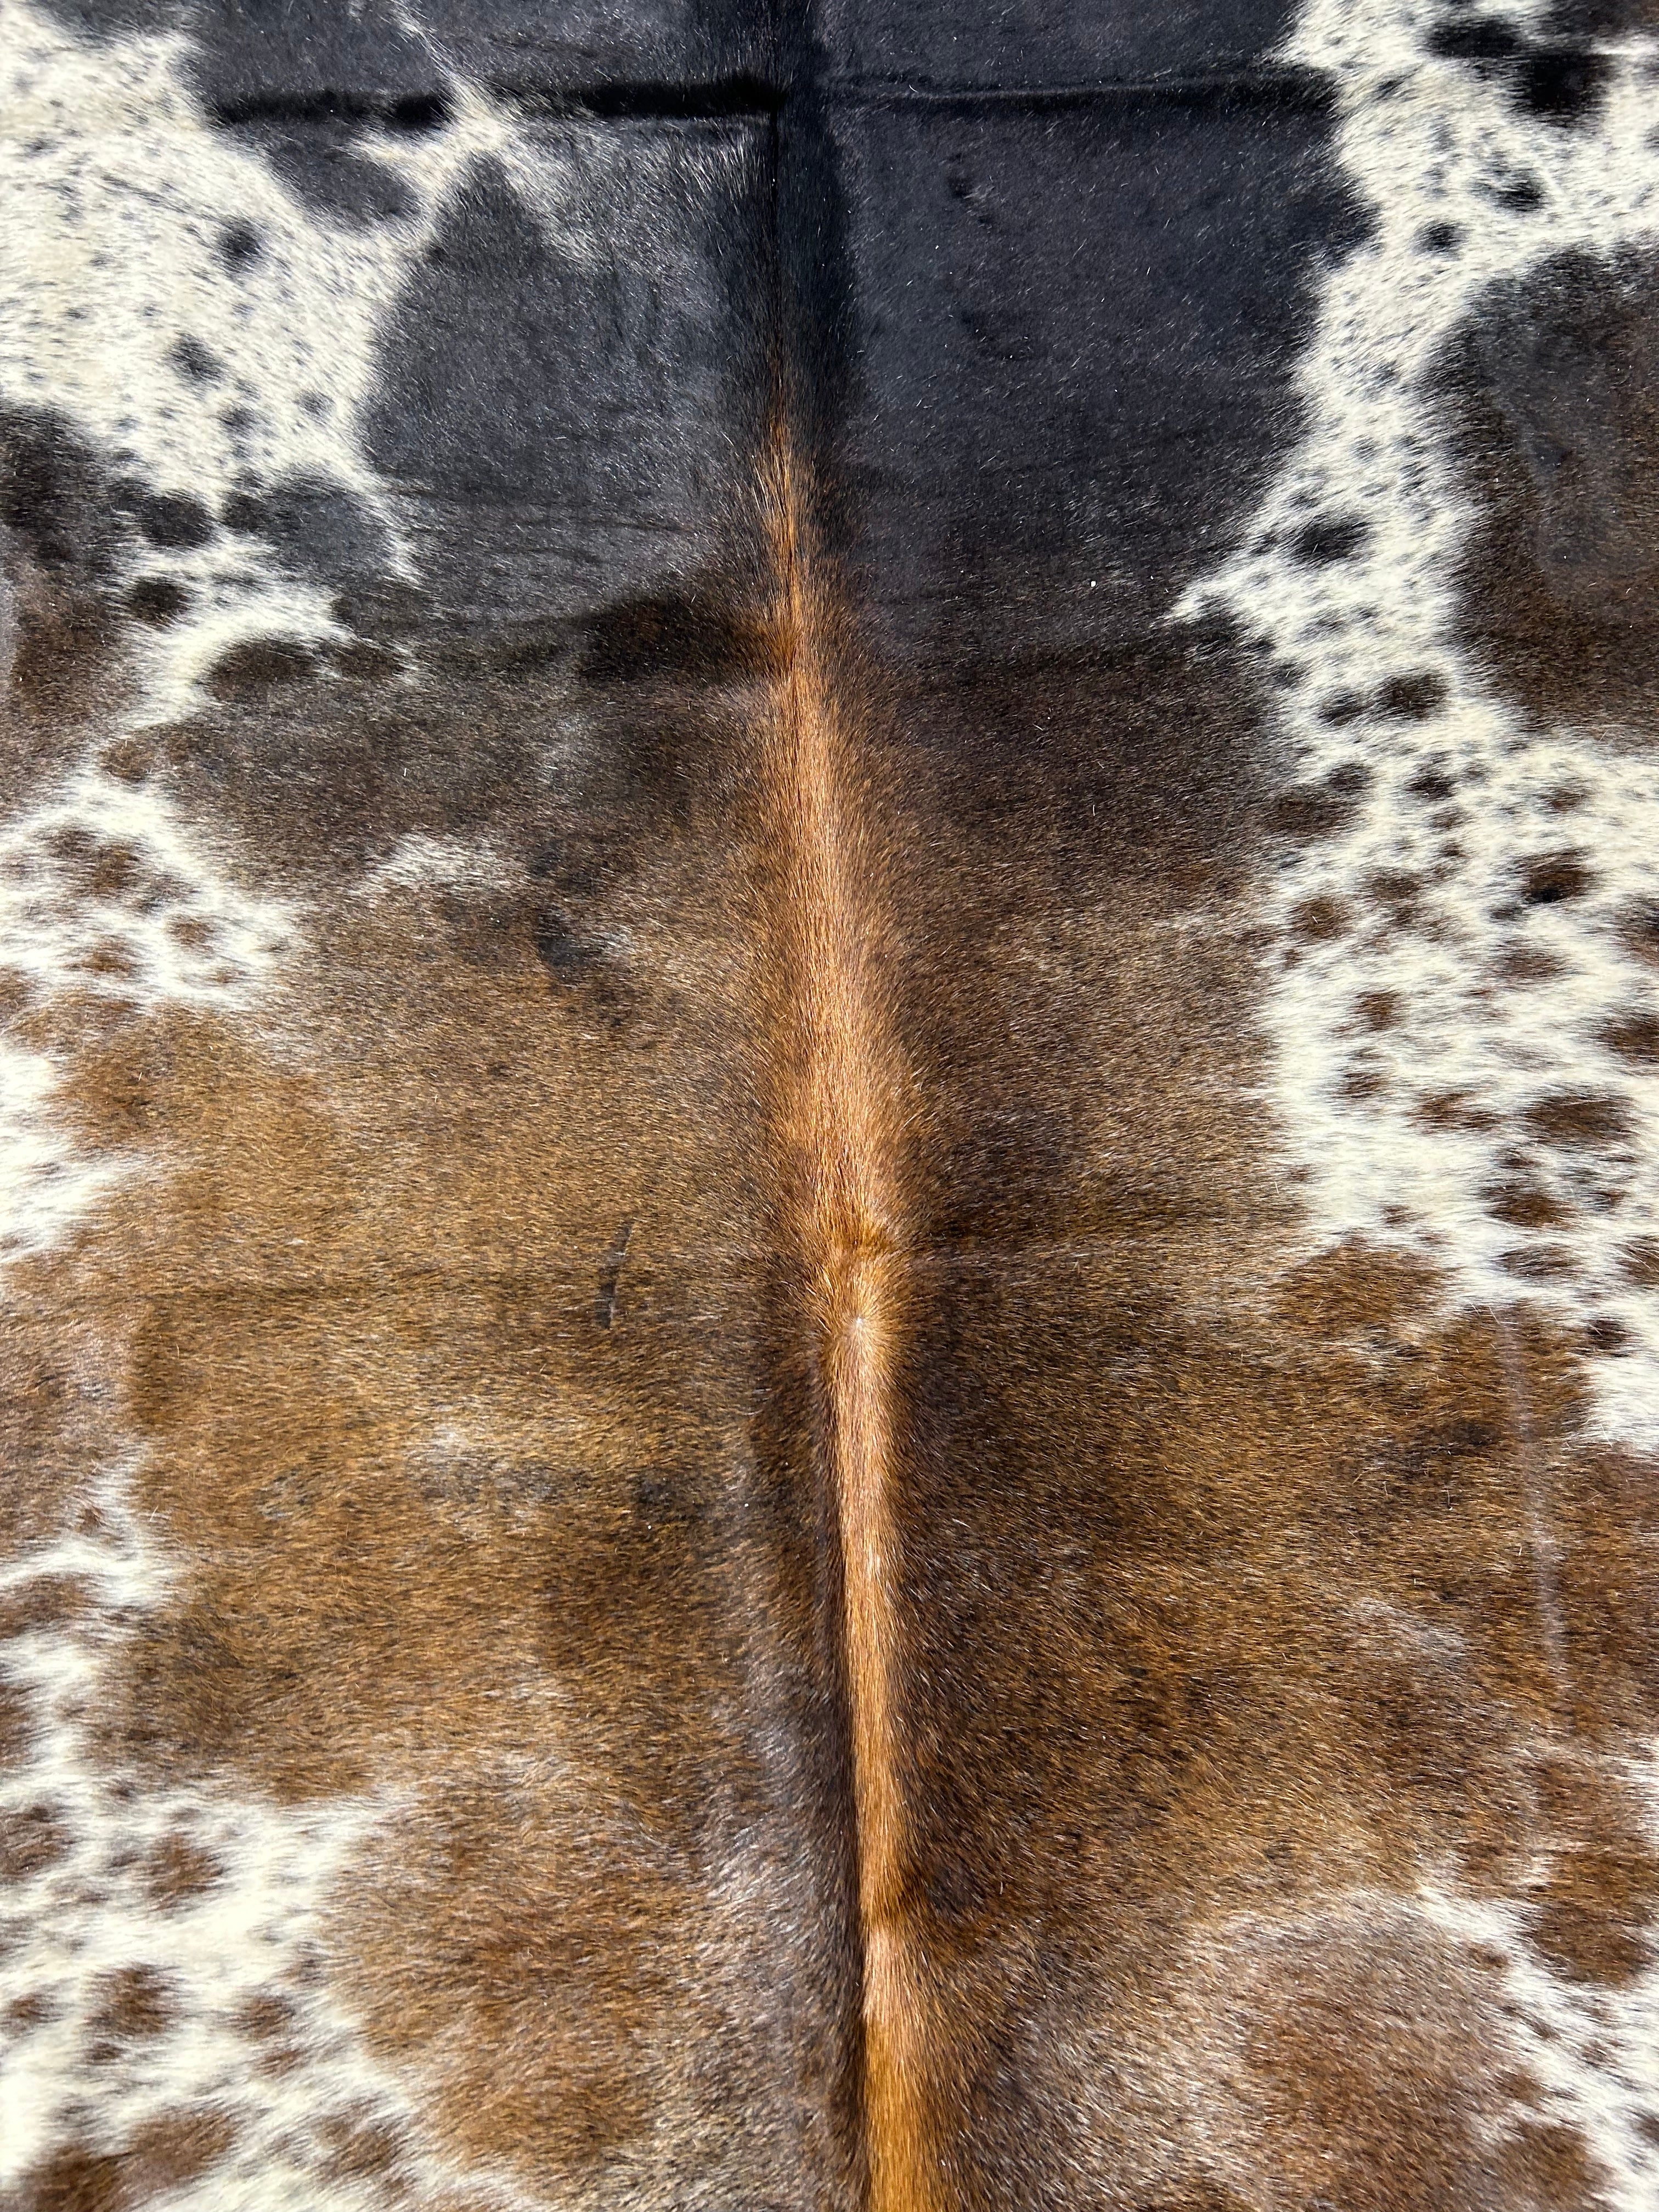 Gorgeous Spotted Brazilian Cowhide Rug Size: 8x6.7 feet O-421